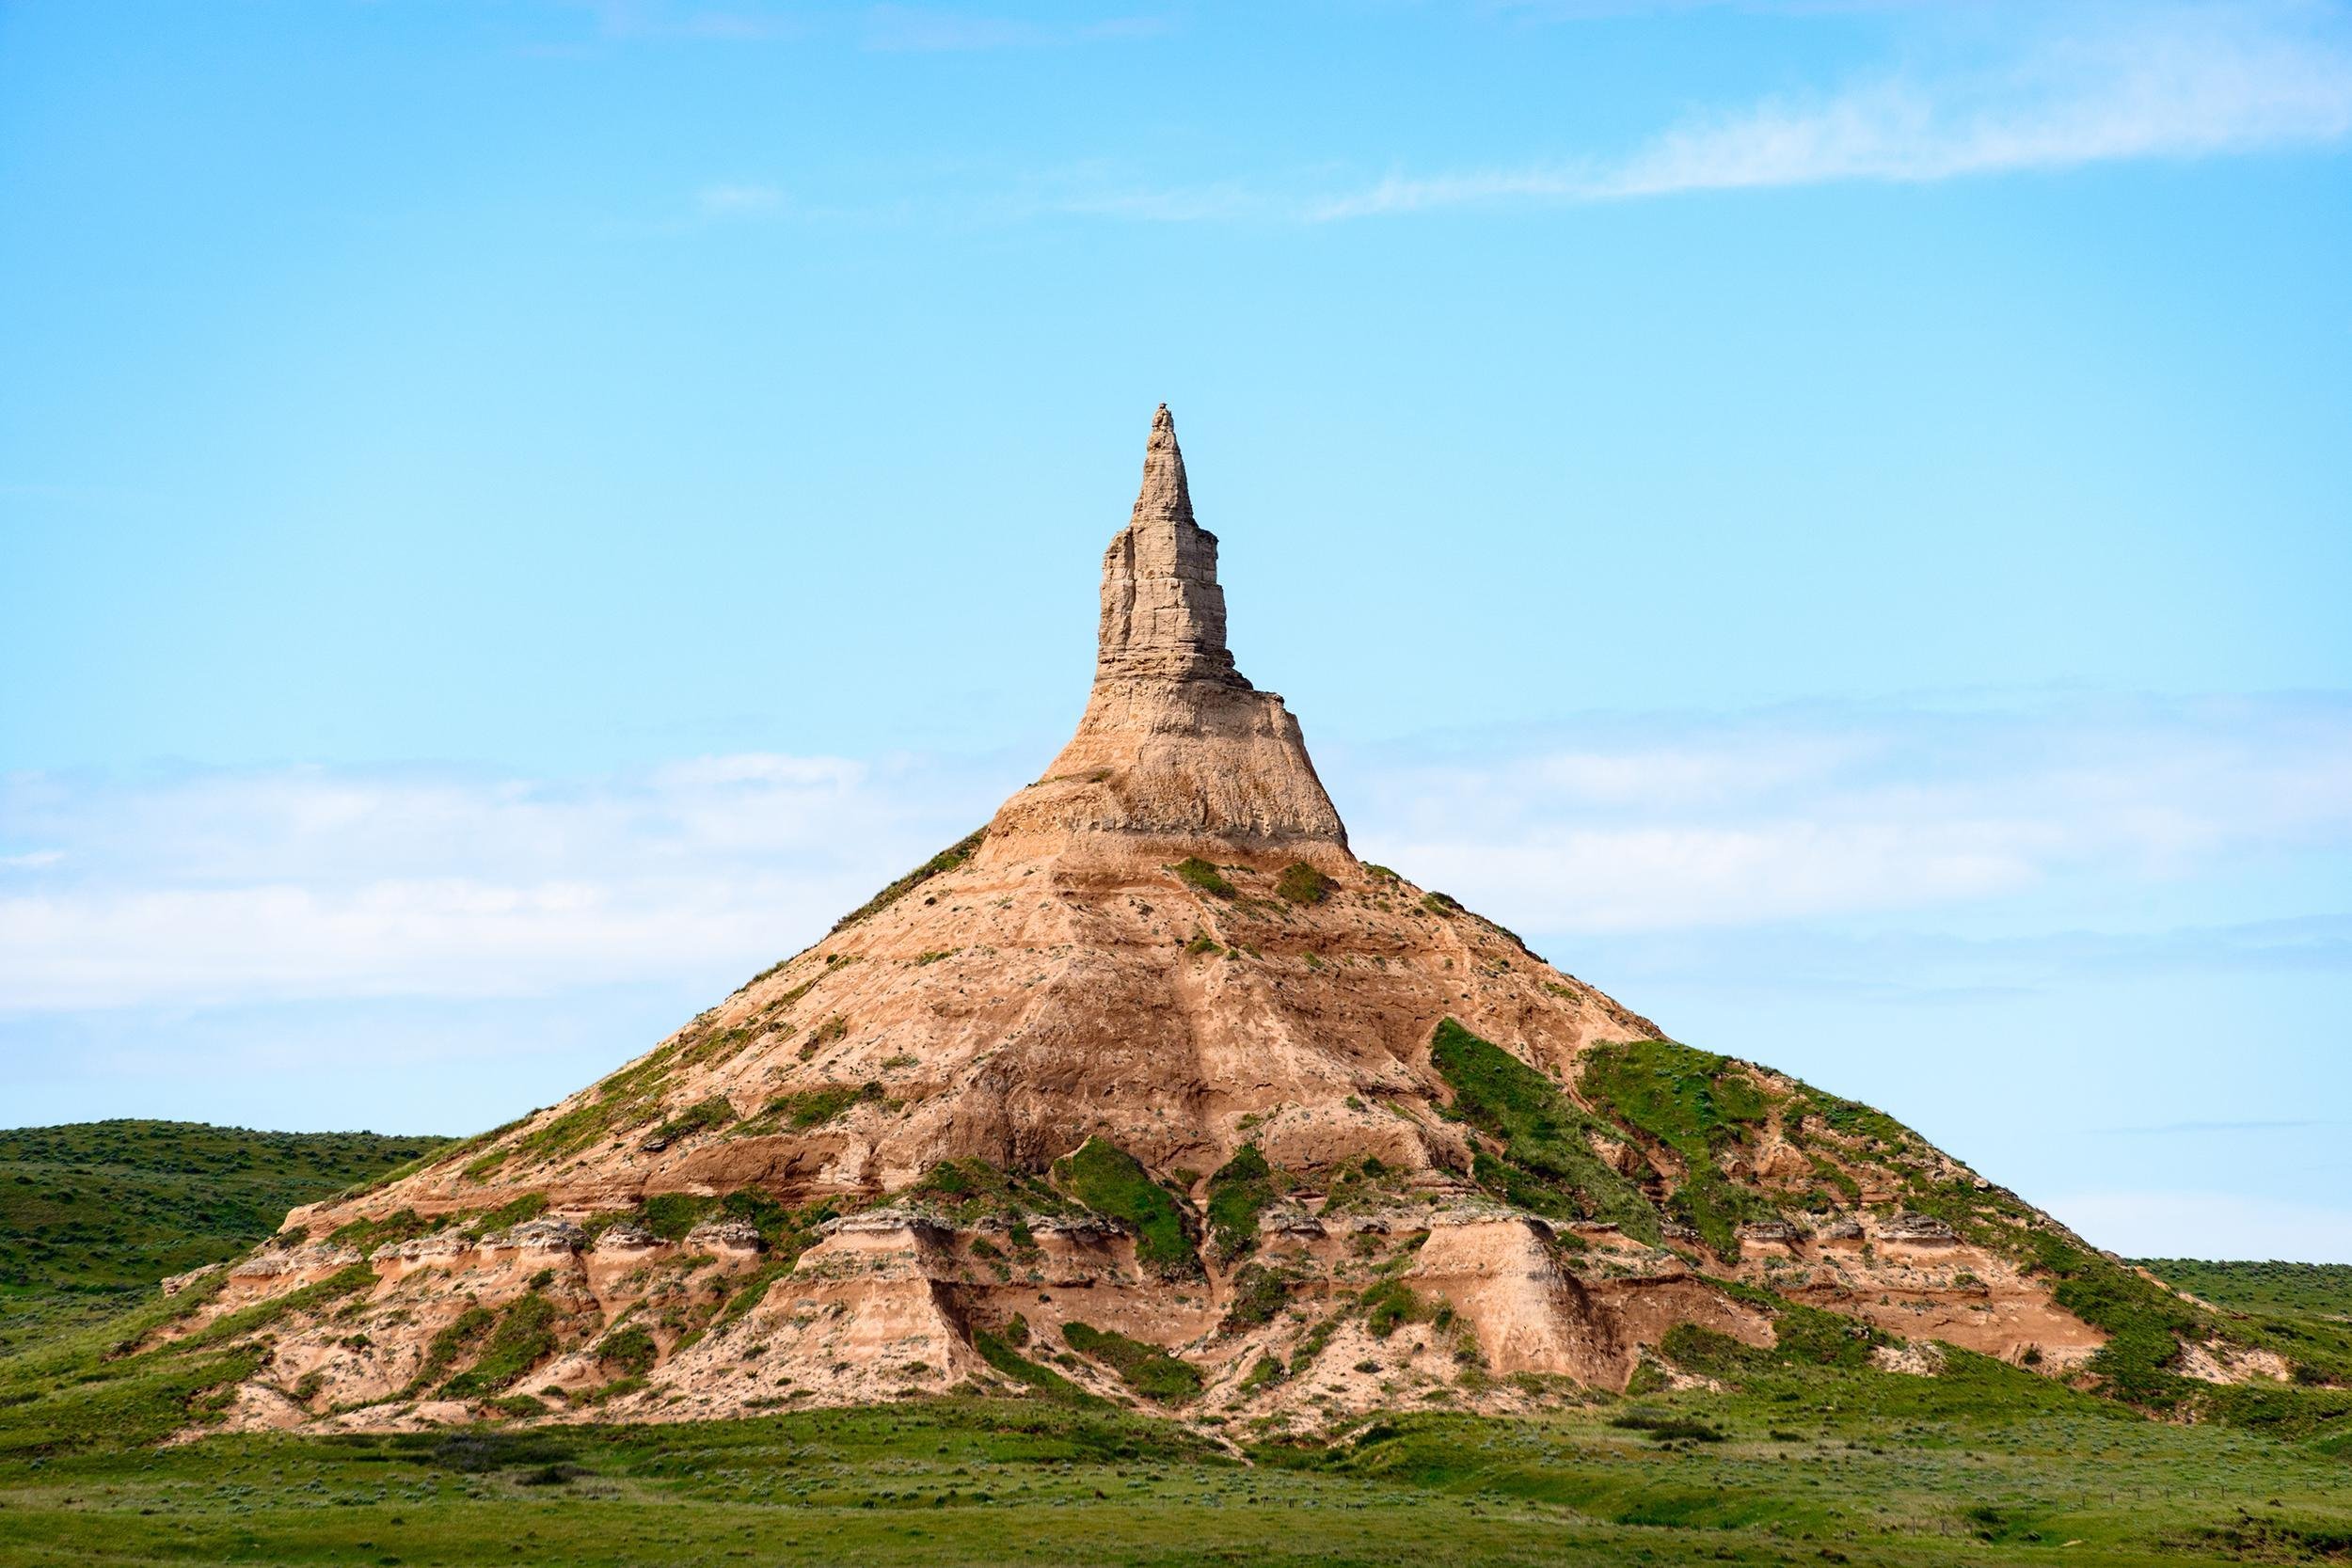 <p>Nebraska may not evoke thrills or visions of the perfect photo, but there is at least one awe-inspiring place for a selfie in the Cornhusker State. Chimney Rock National Historic Site in Bayard is a beautiful, soaring rock formation. Before snapping a smartphone photo, think of the reactions of early pioneers who passed by Chimney Rock heading west on the Oregon Trail.</p>